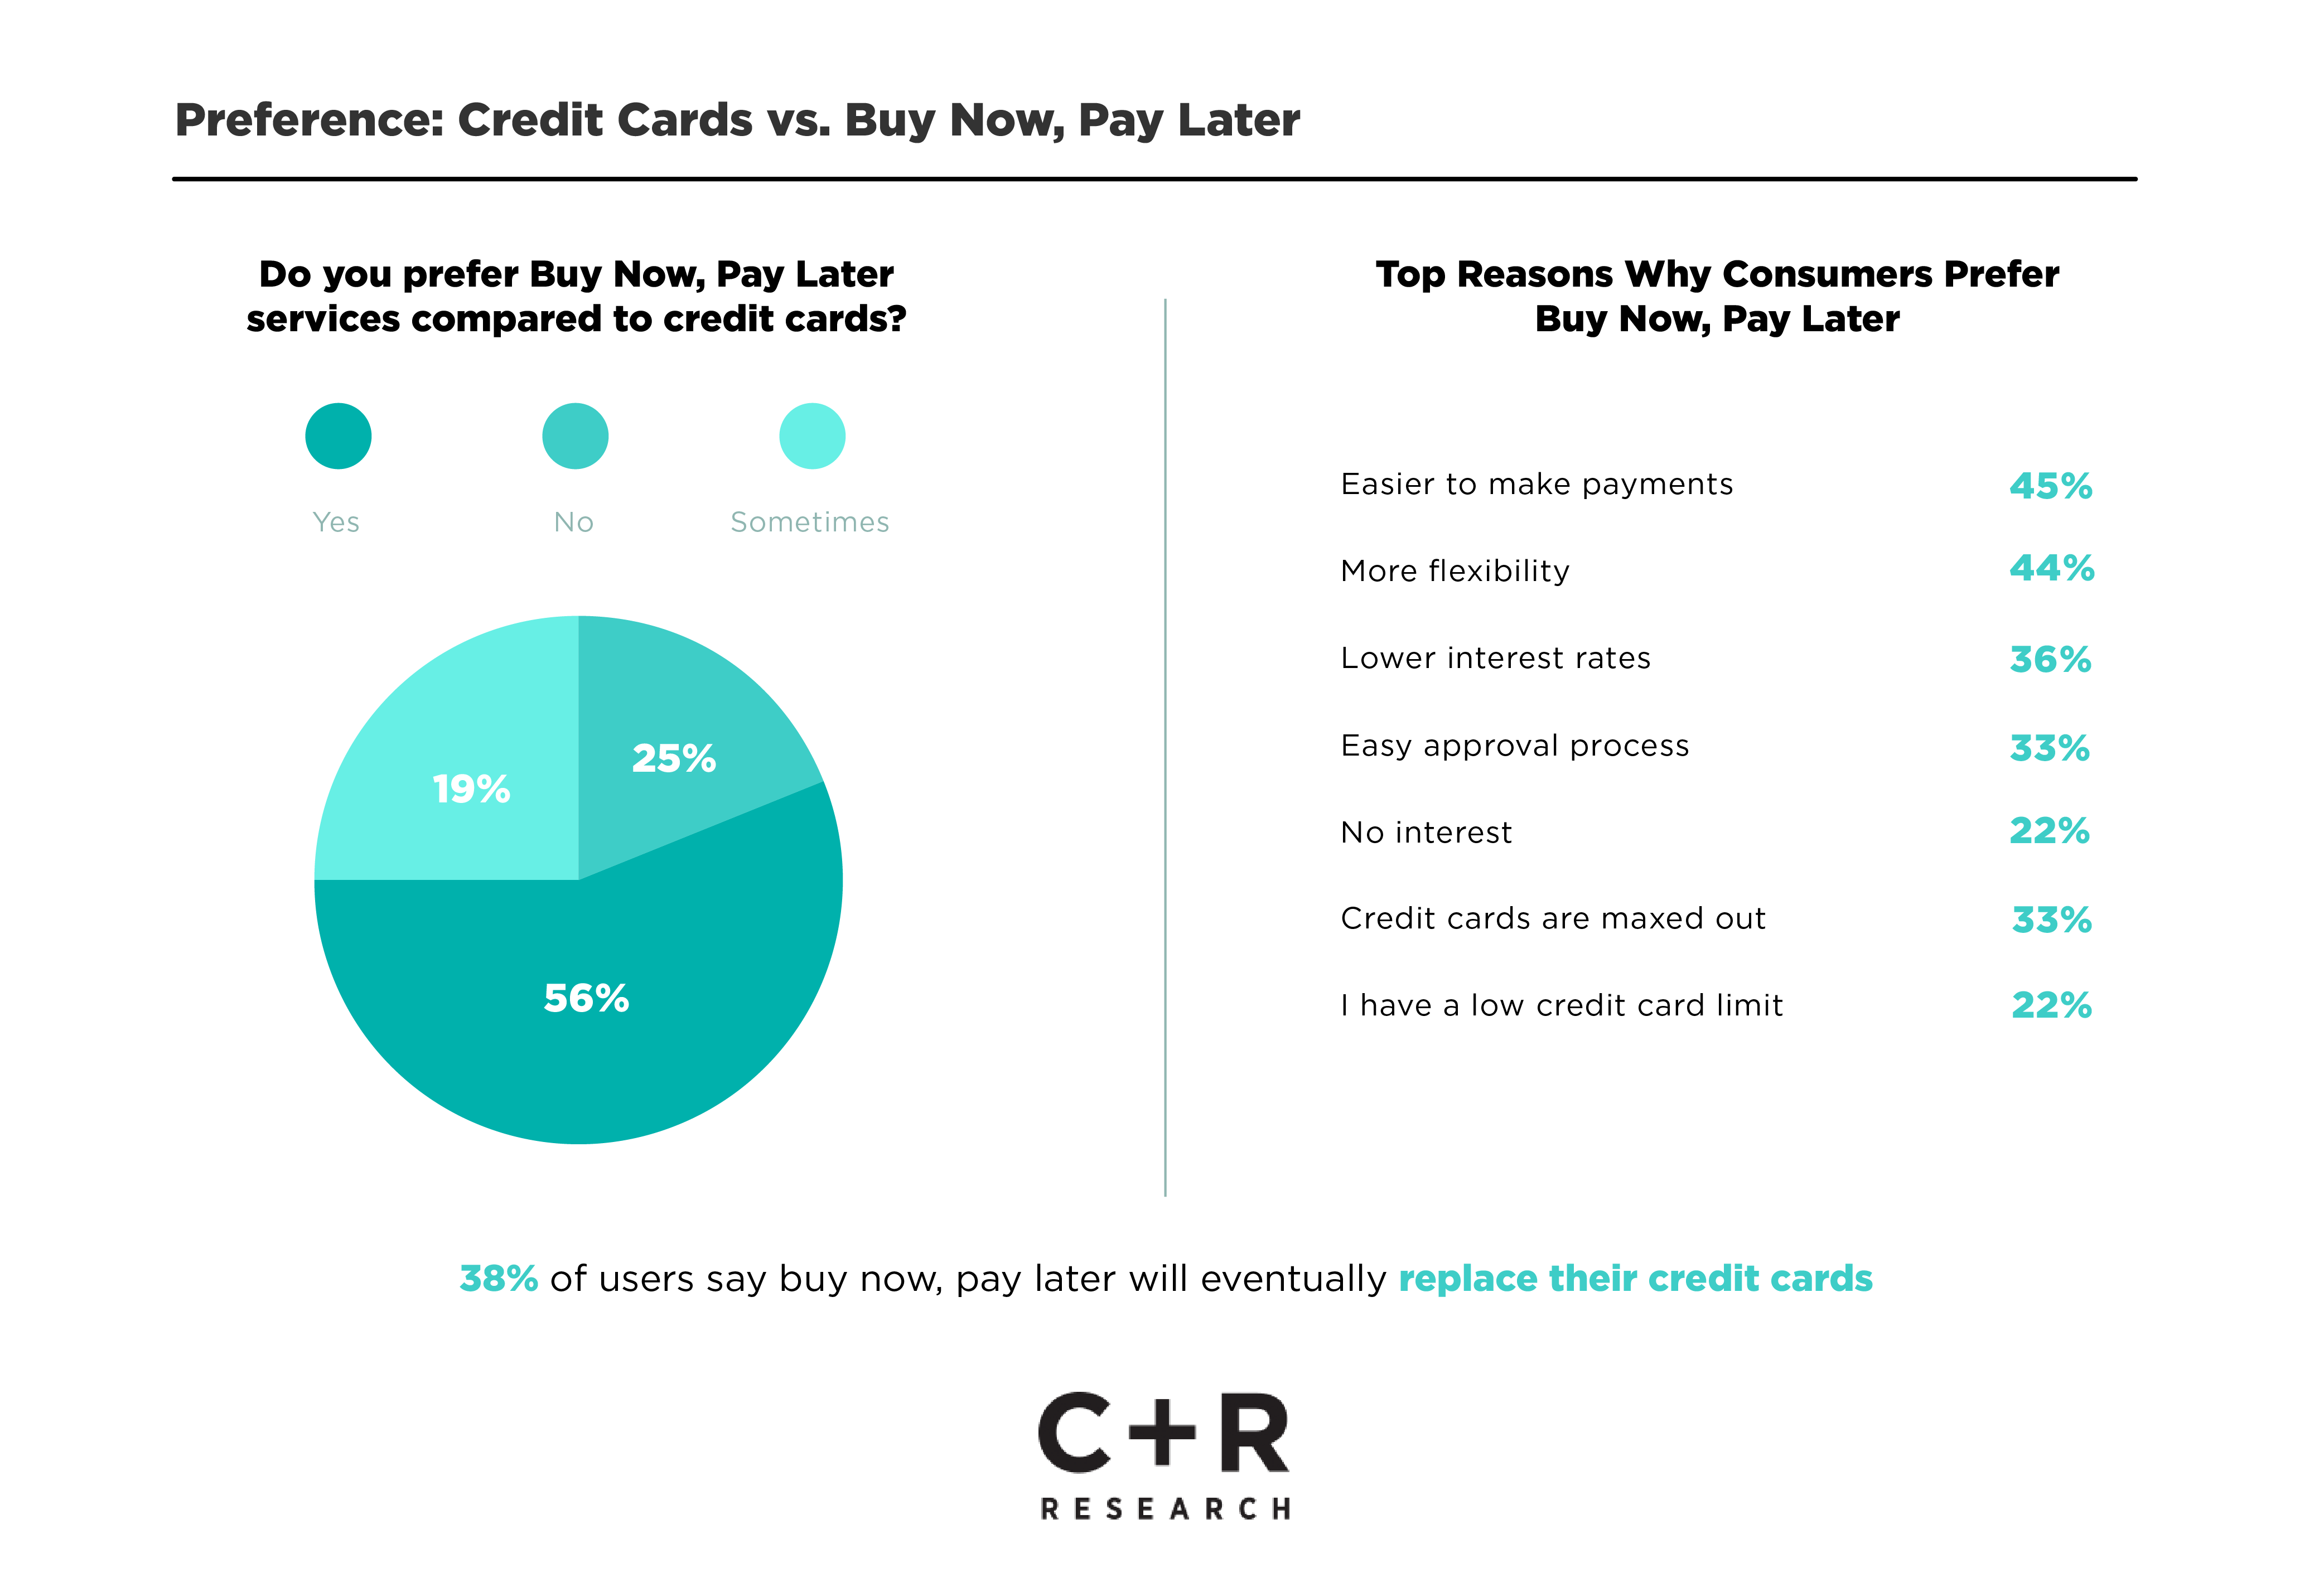 Why Choose Buy Now, Pay Later Over Credit Cards